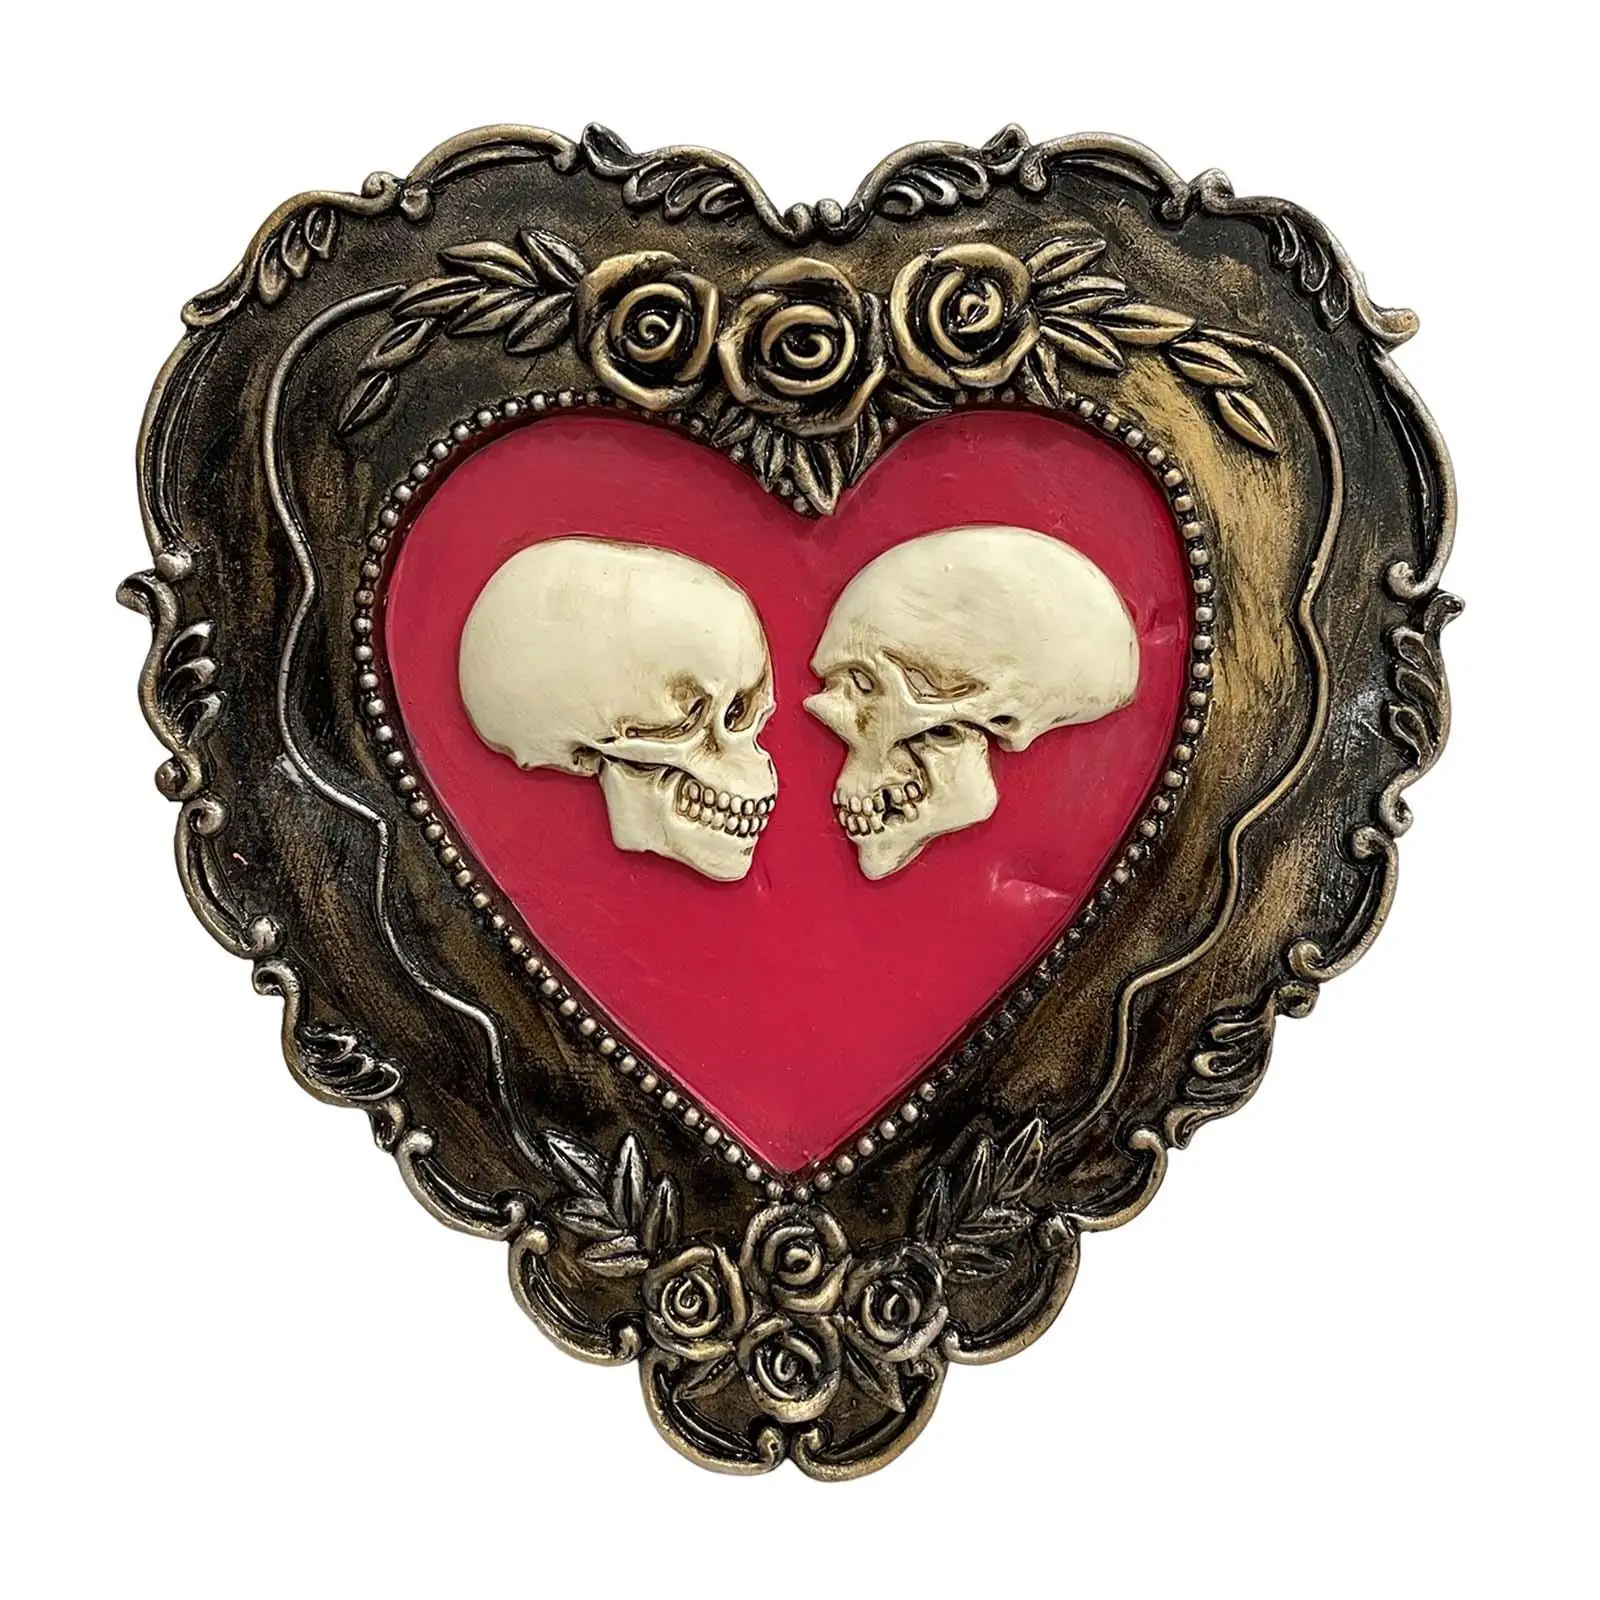 Engraved Love Statue Resin Ornament for